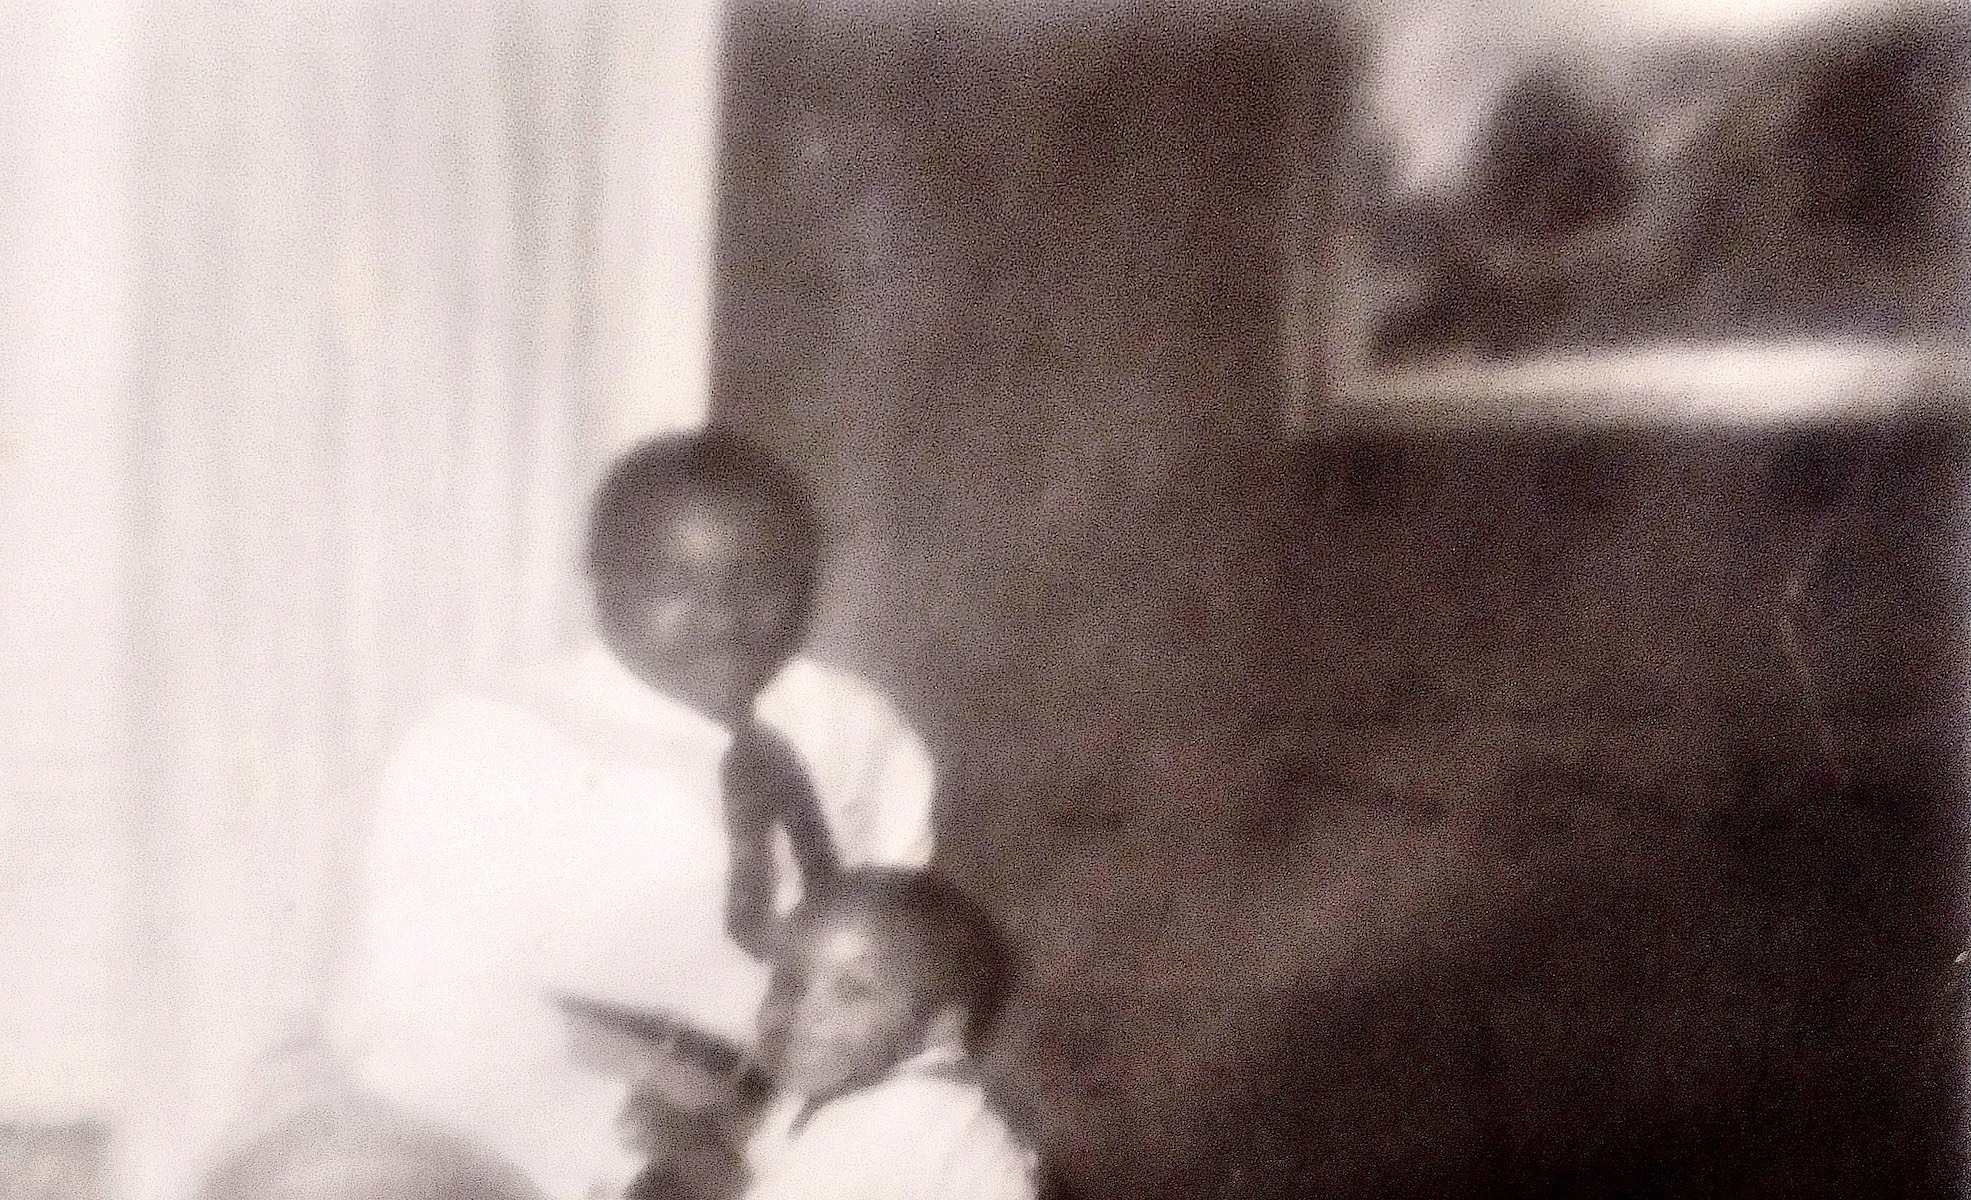 Robert Arrington with his daddy in his Harlem apartment circa 2-3 years old. Photo courtesy of Robert Arrington.